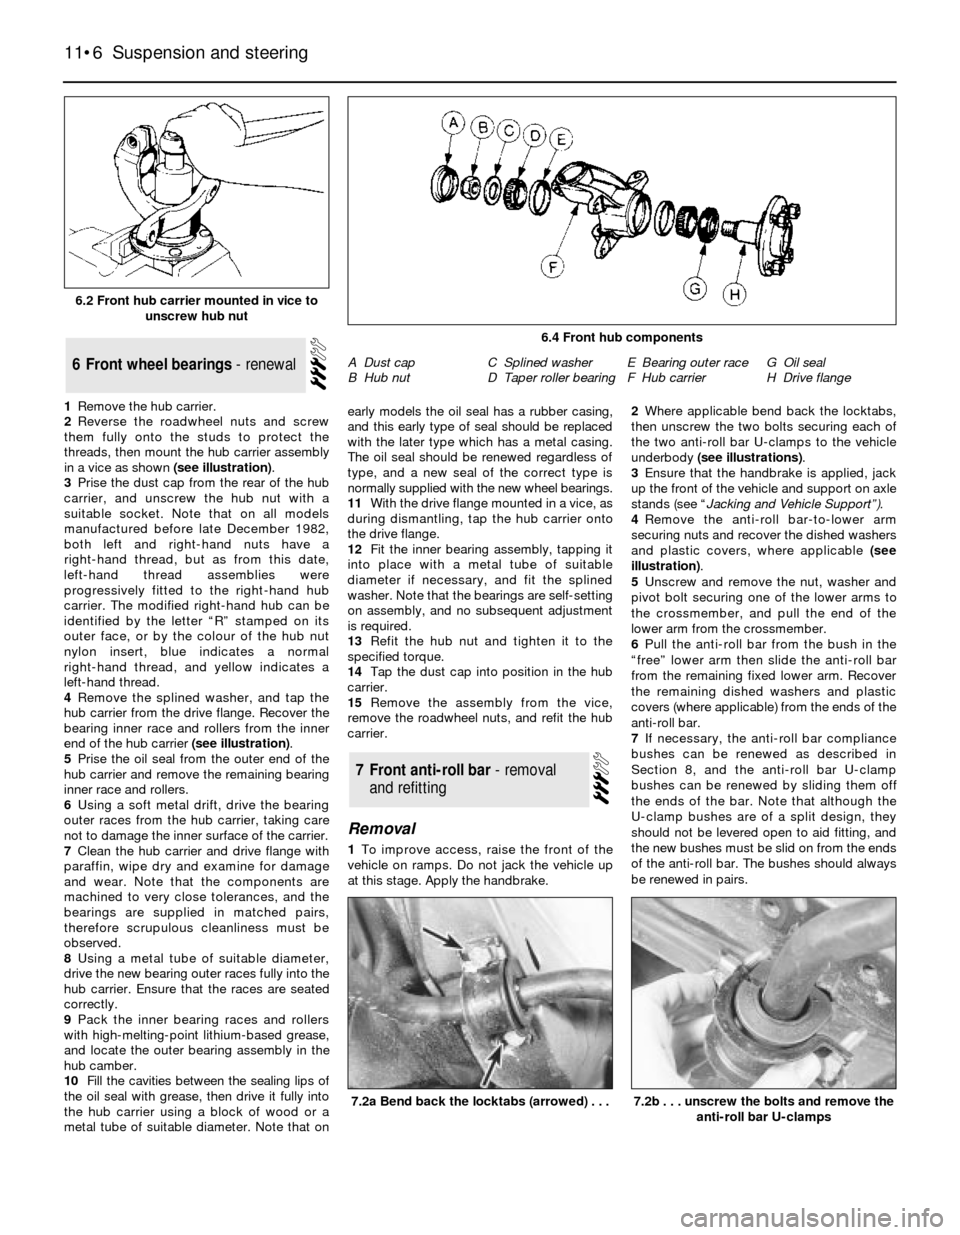 FORD SIERRA 1993 2.G Suspension And Steering Workshop Manual 1Remove the hub carrier.
2Reverse the roadwheel nuts and screw
them fully onto the studs to protect the
threads, then mount the hub carrier assembly
in a vice as shown (see illustration).
3Prise the d